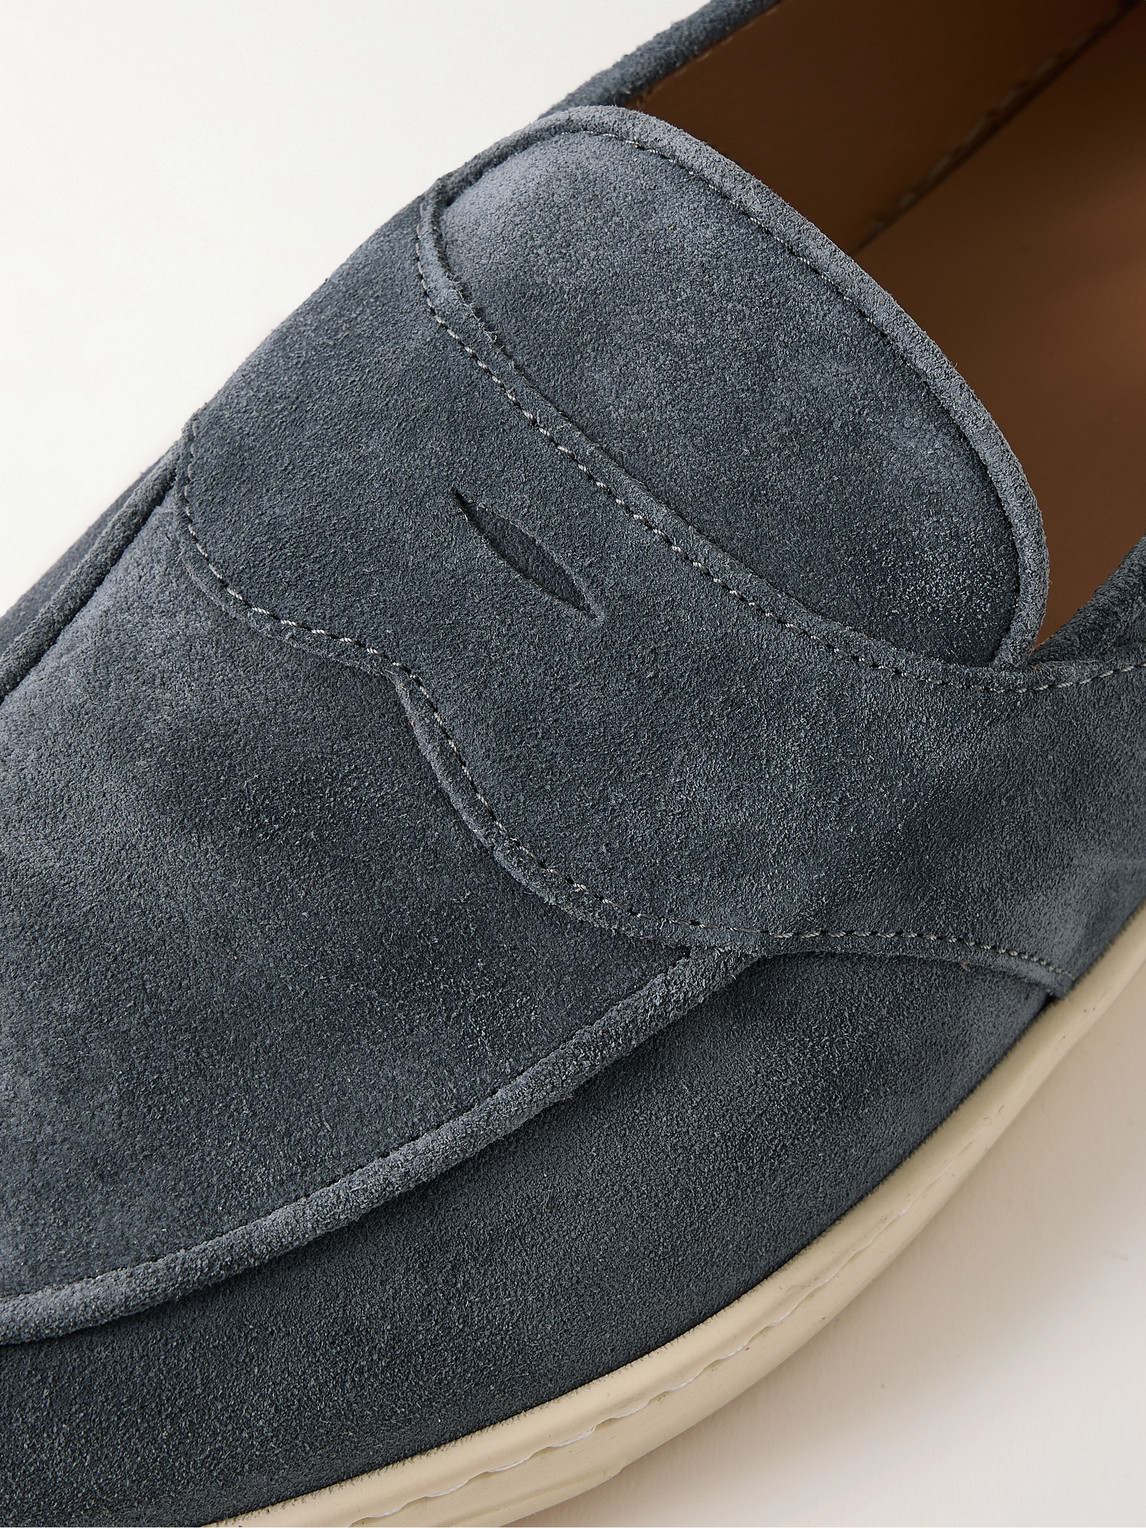 Shop George Cleverley Joey Suede Penny Loafers In Blue